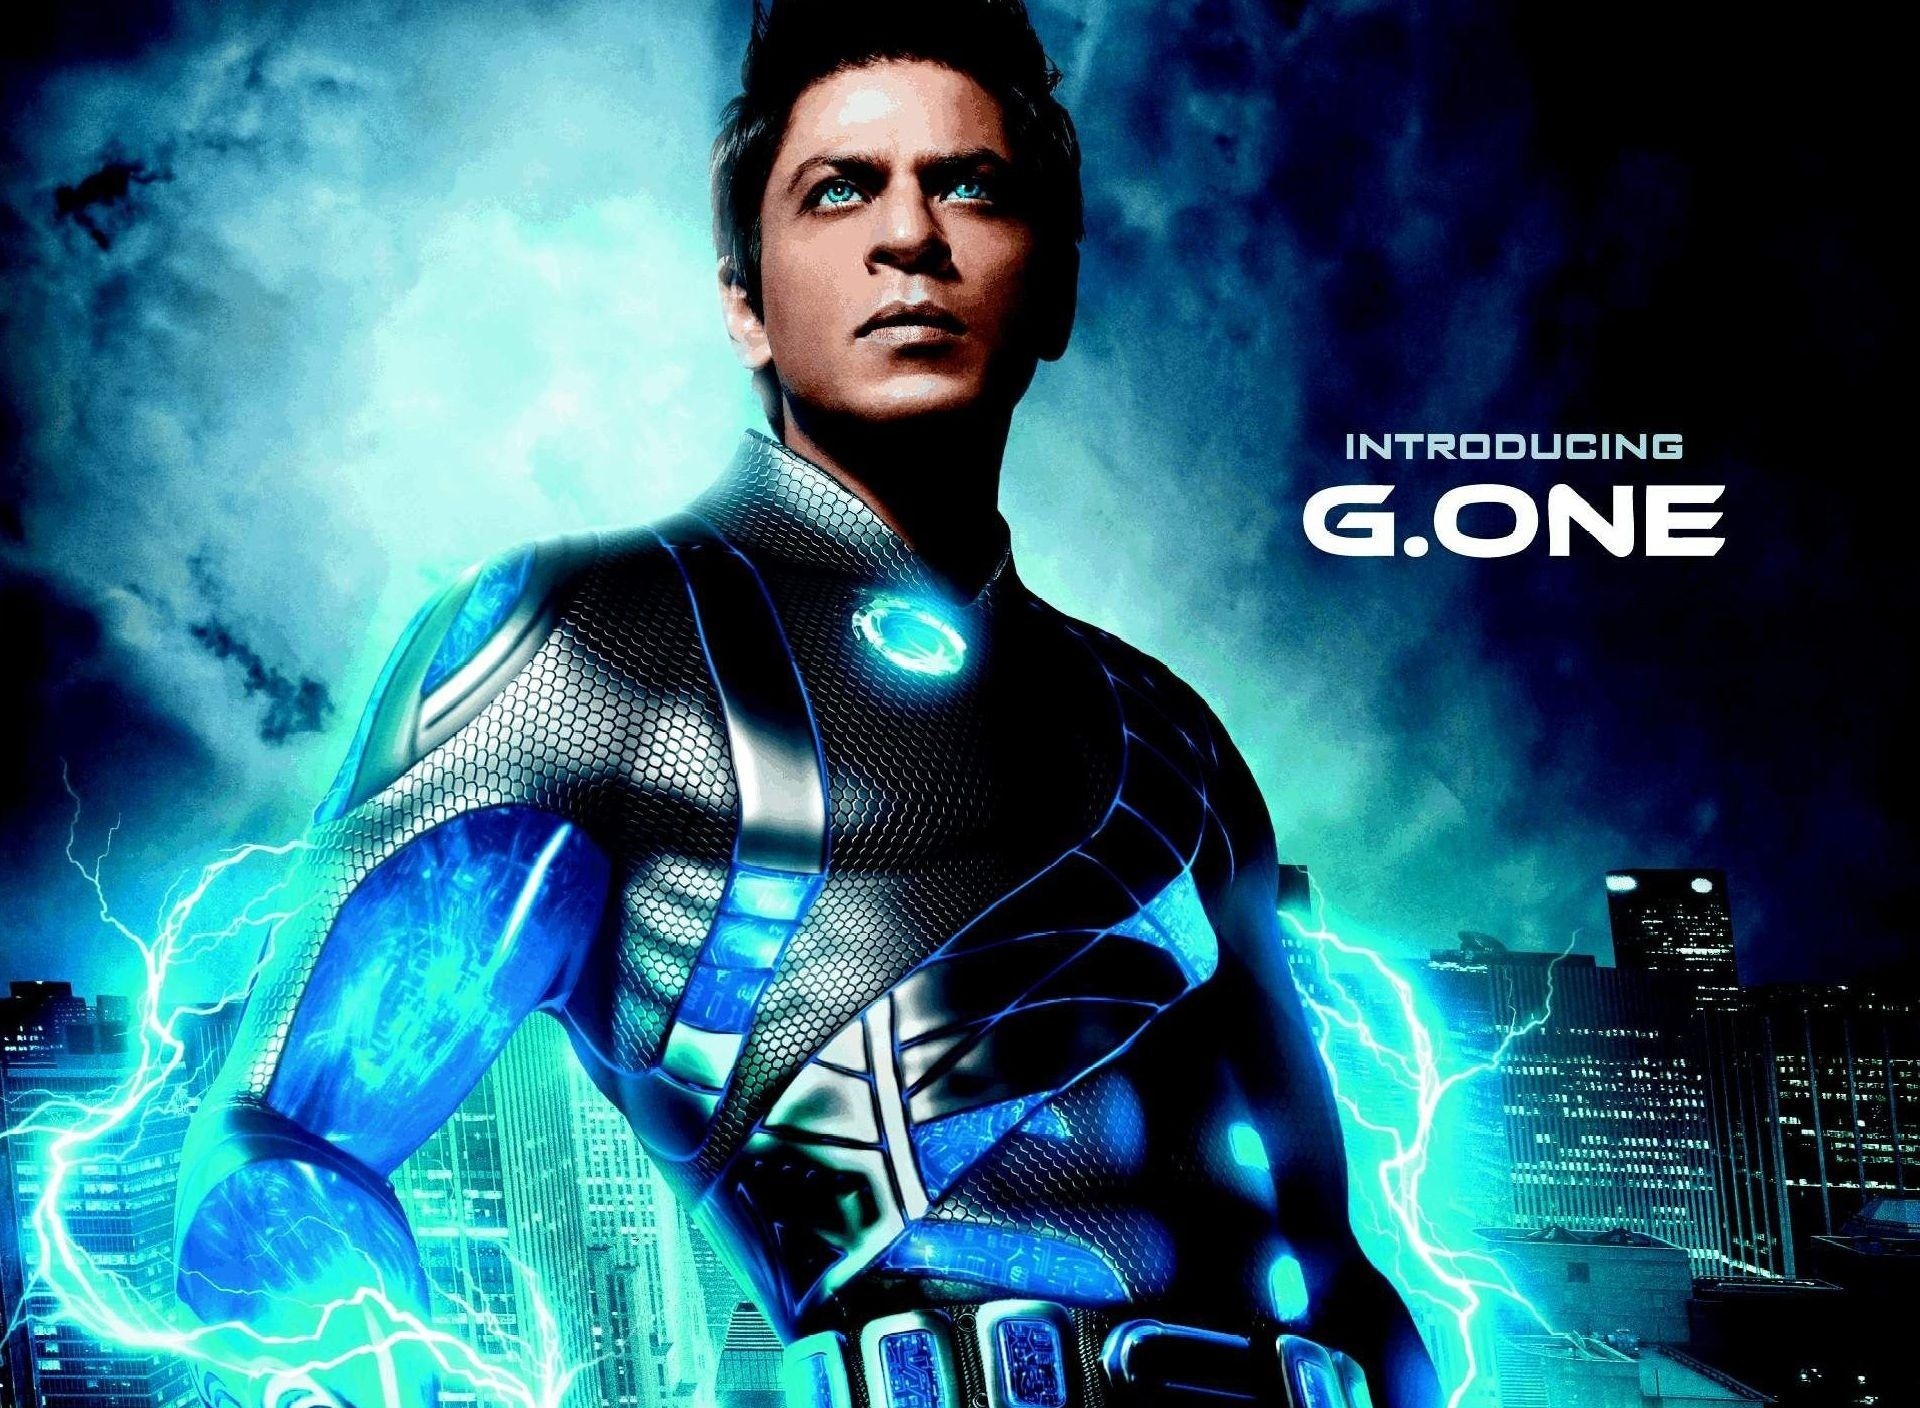 Ra One HD Wallpaper Image Pictures Photos